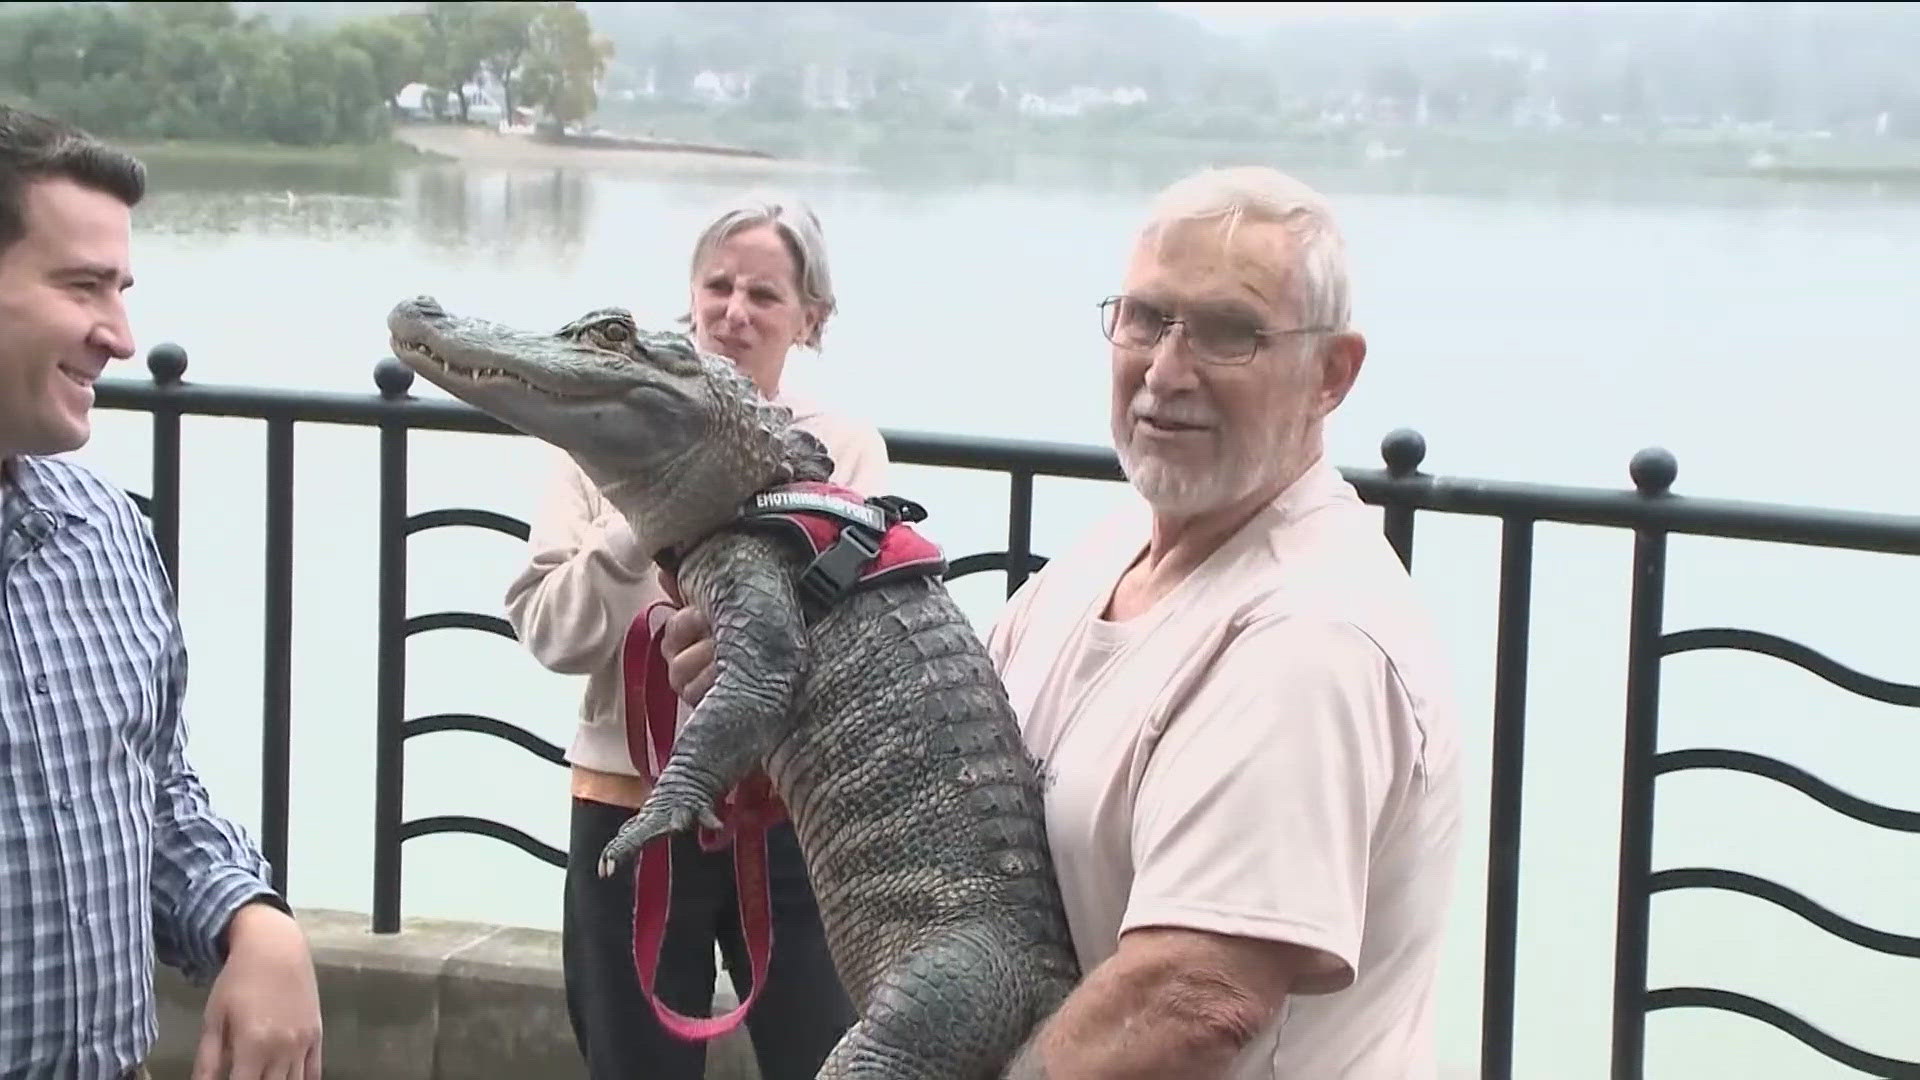 The owner believes the alligator was stolen as part of a prank.